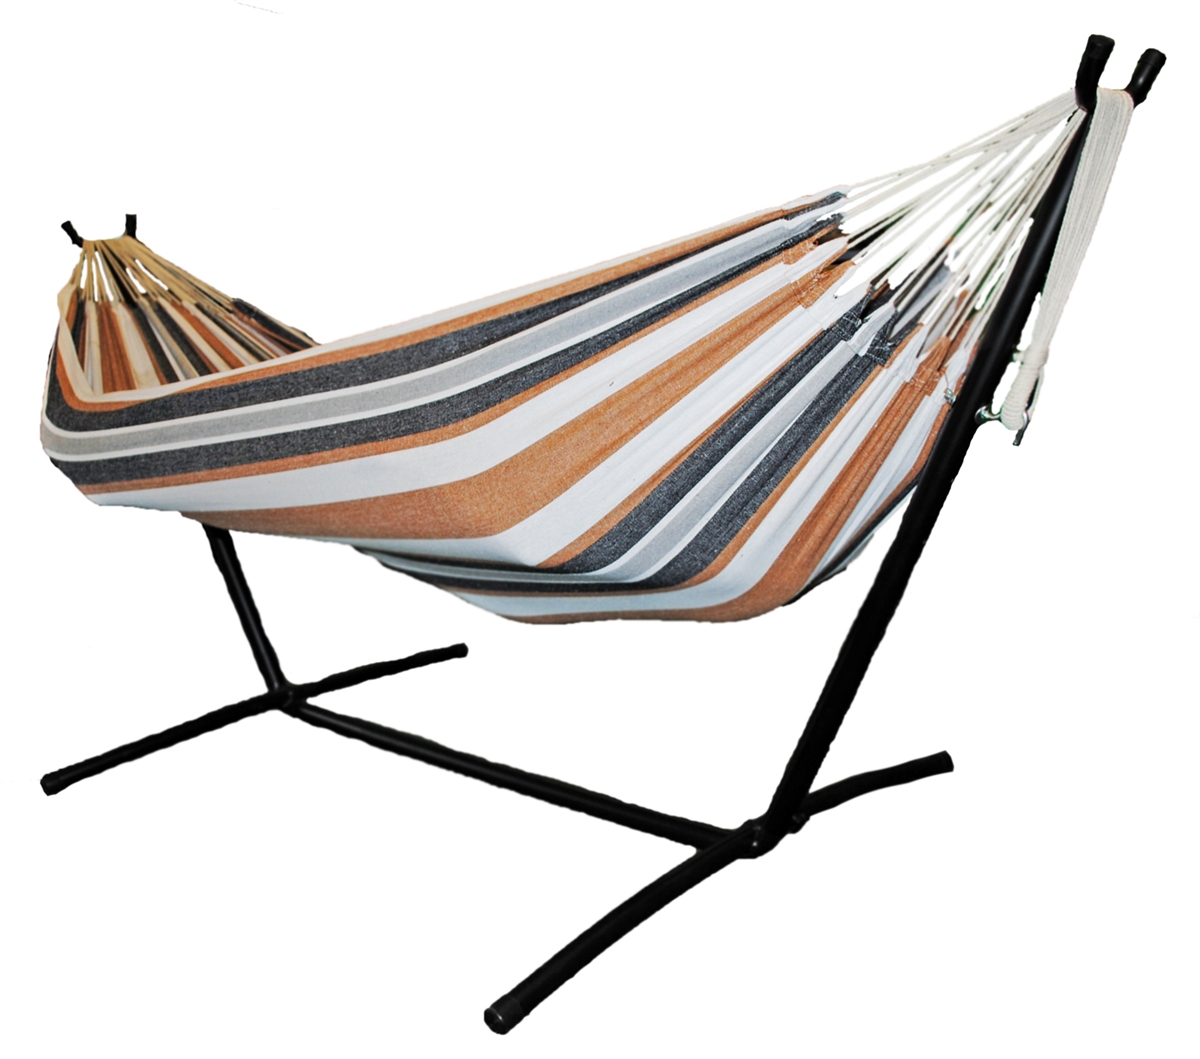 Omni Two Person Hammock with Compact Steel Stand and Case - Tan/Navy - image 1 of 1